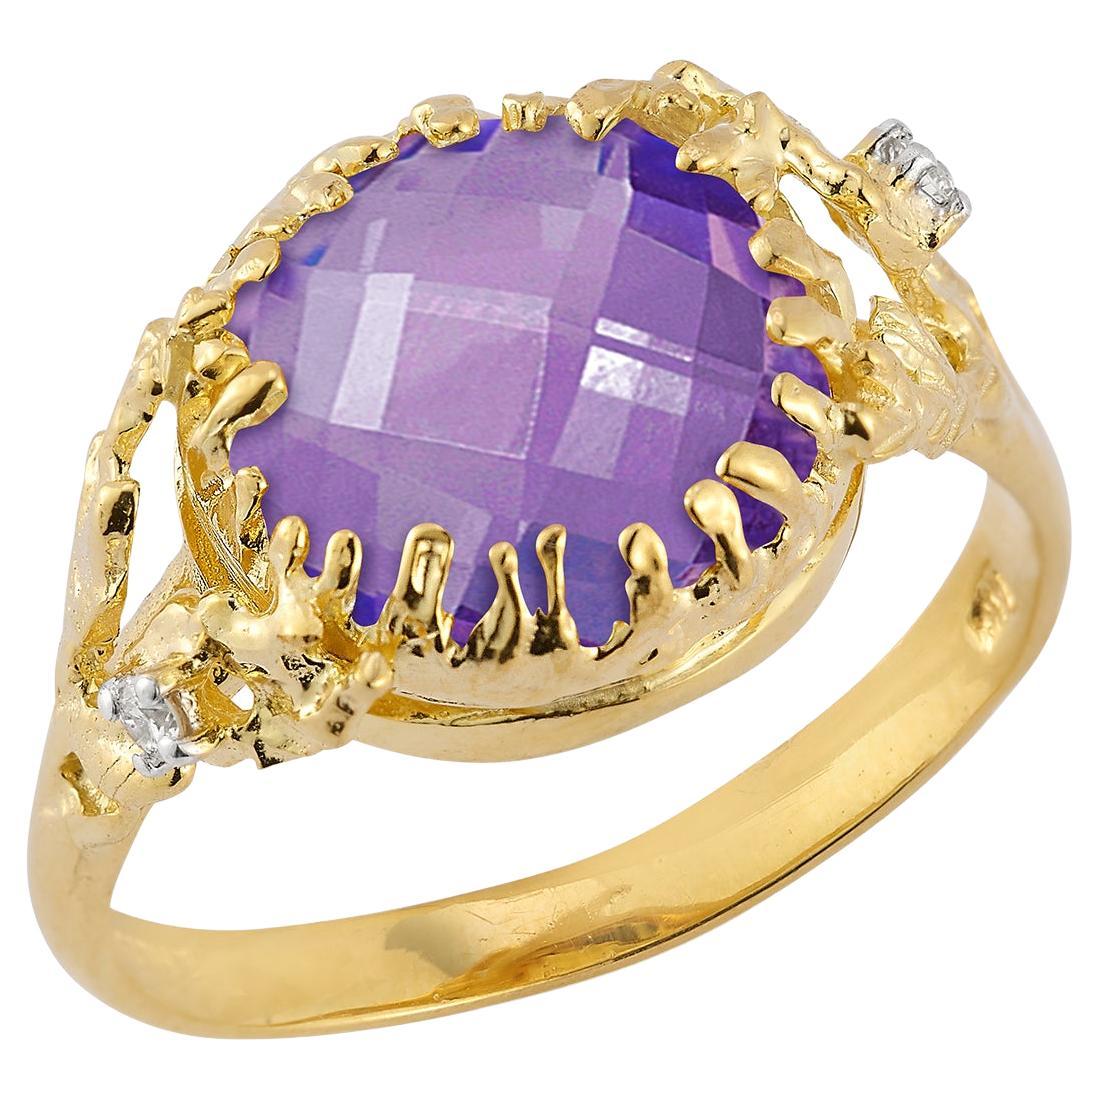 For Sale:  Hand-Crafted 14K Gold 0.03 ct. tw. Diamond & 3.25CT Amethyst Color Stone Ring